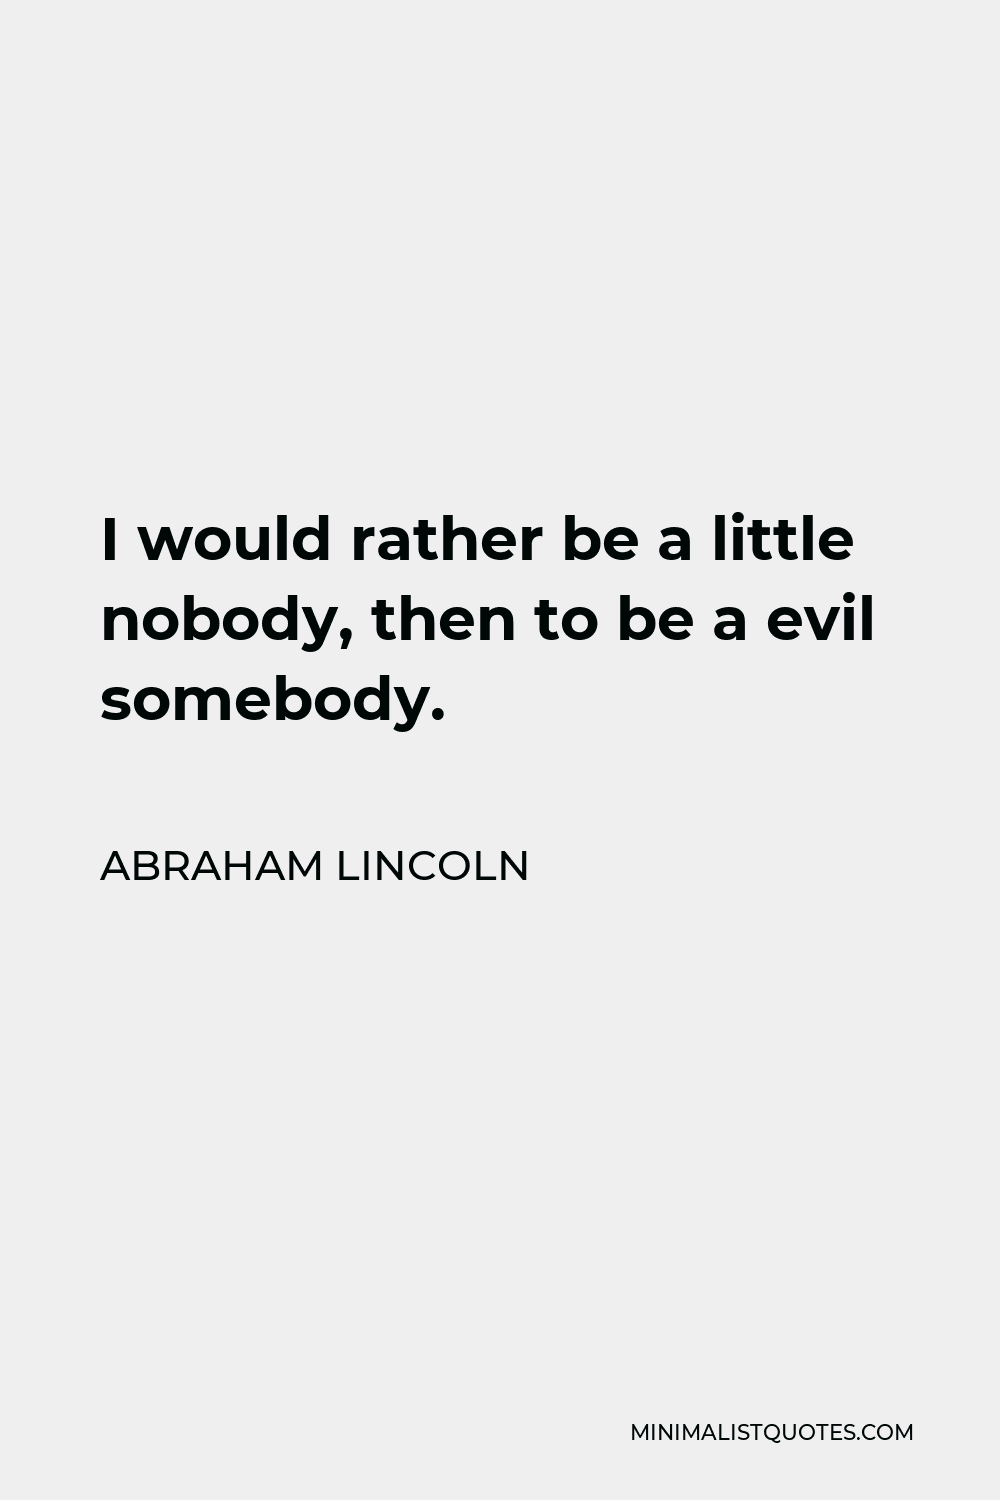 Abraham Lincoln Quote - I would rather be a little nobody, then to be a evil somebody.